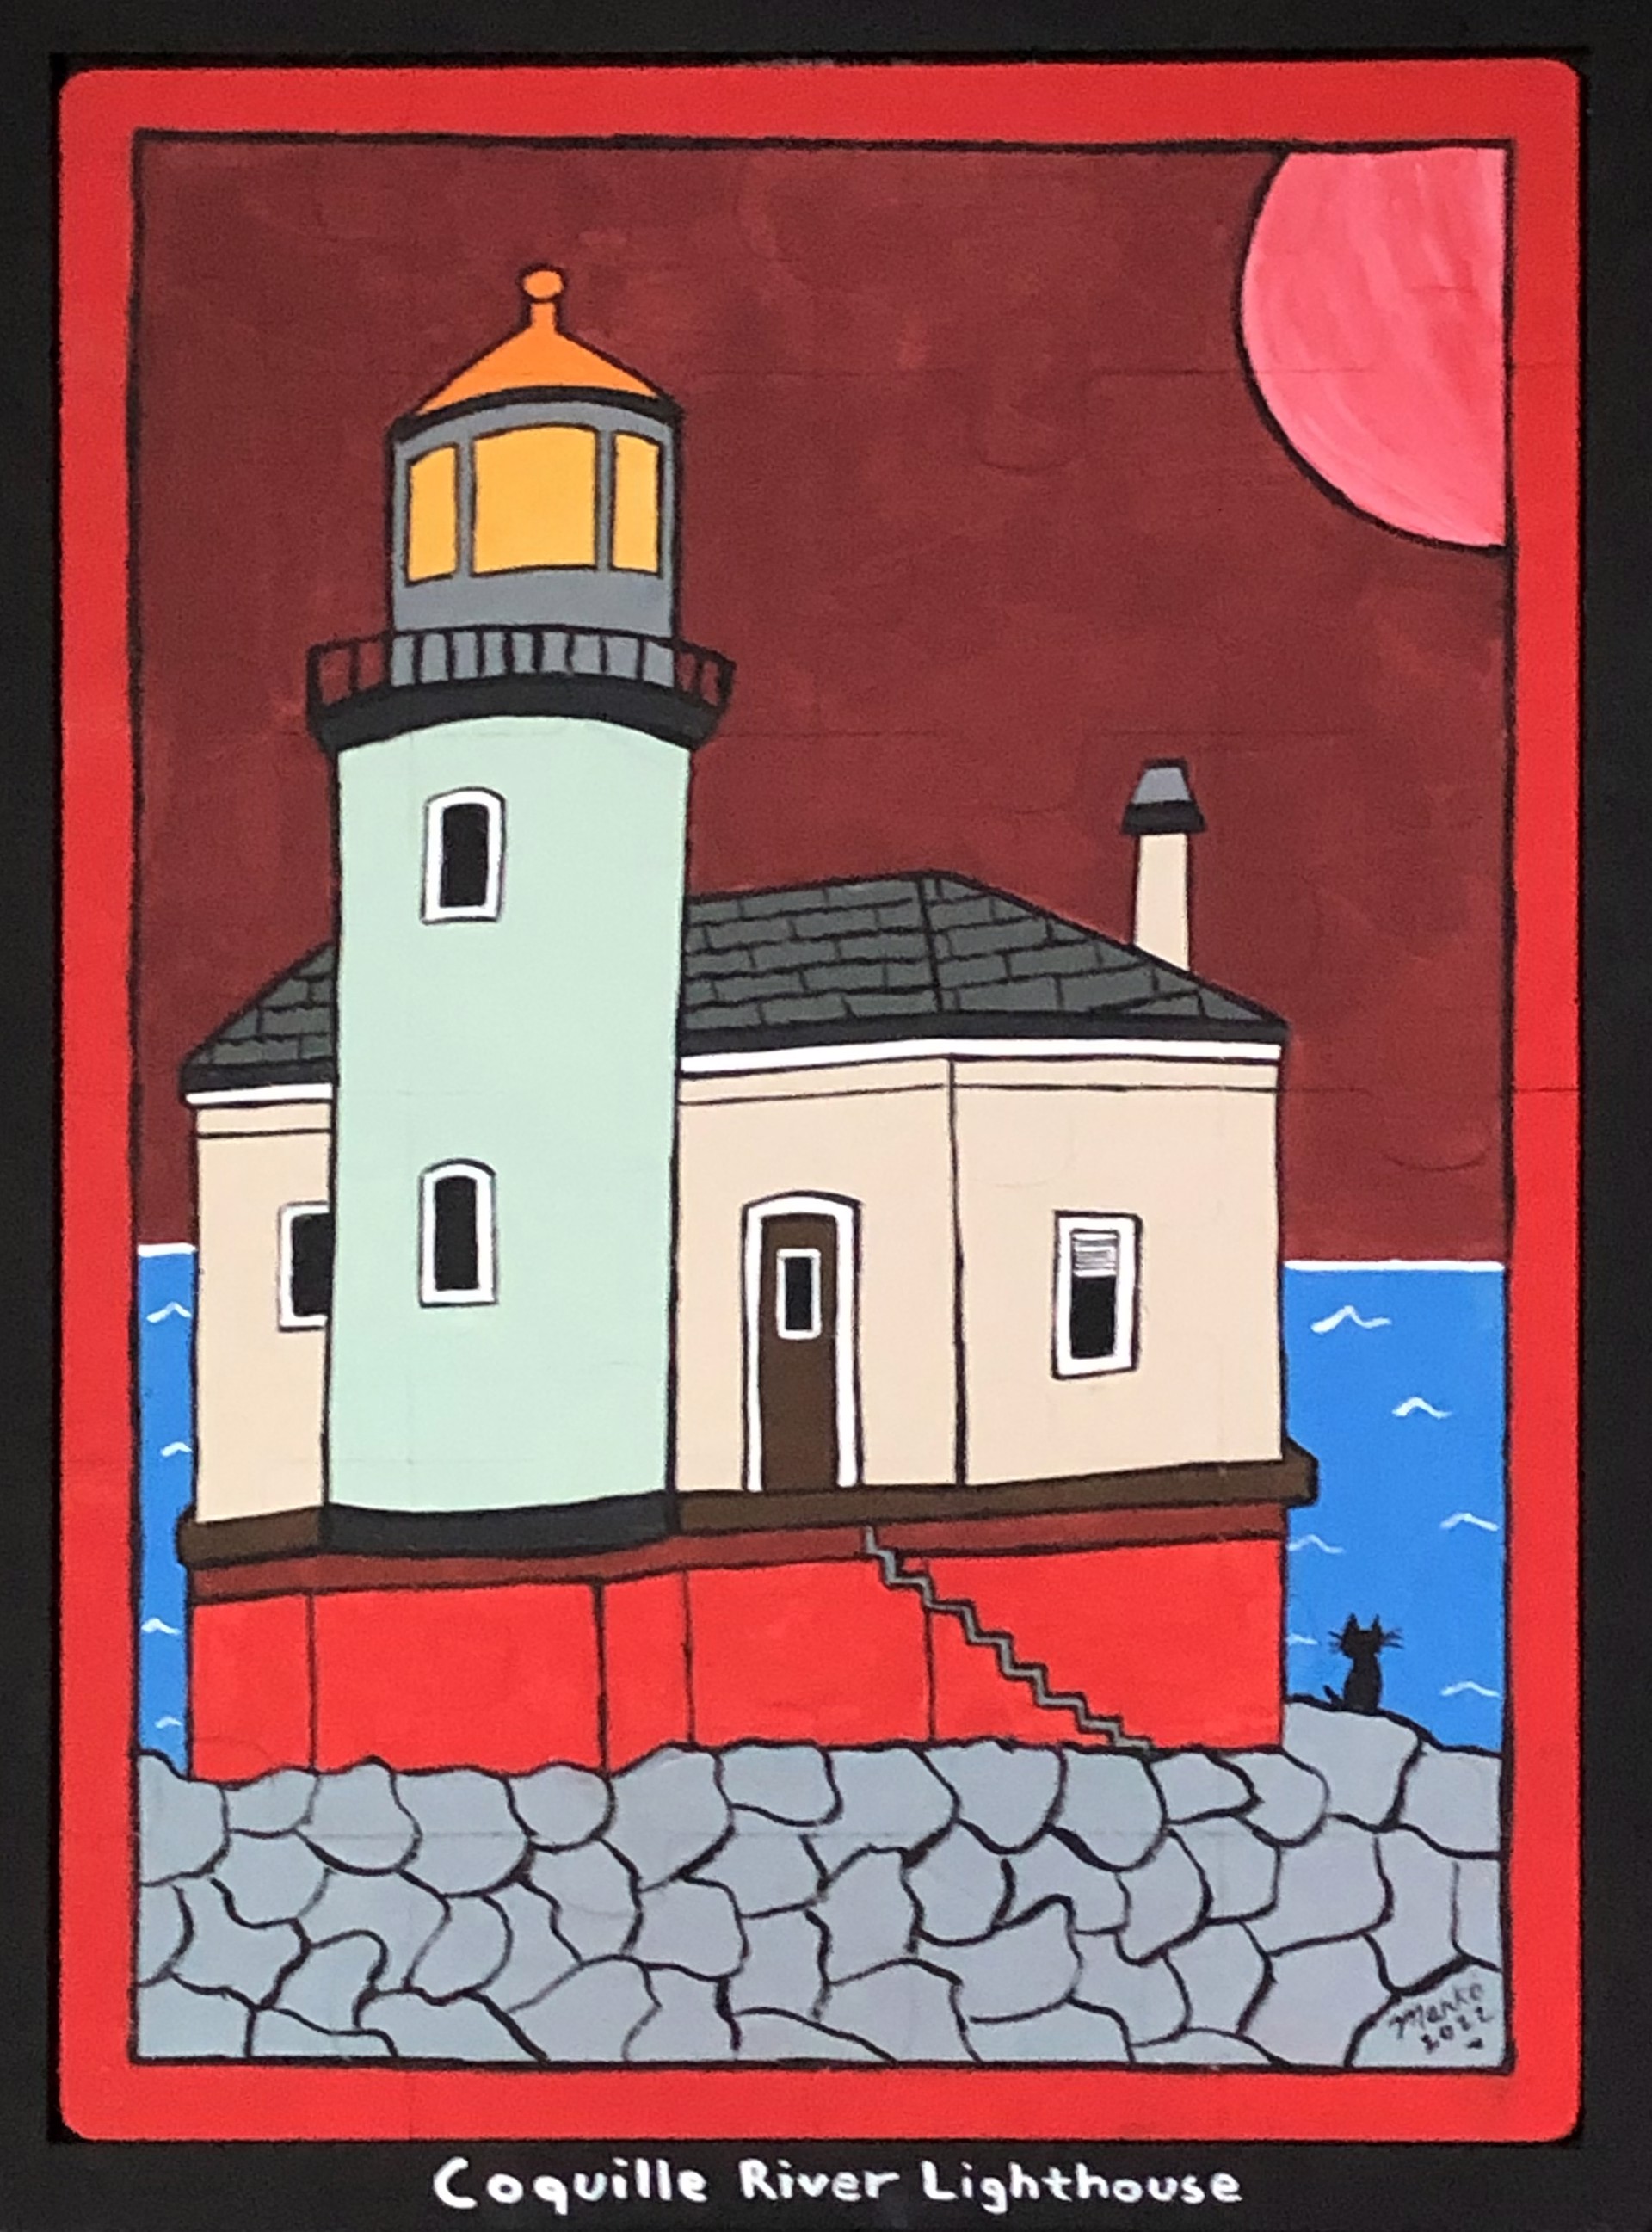 Coquille River Lighthouse by Mark O'Malley